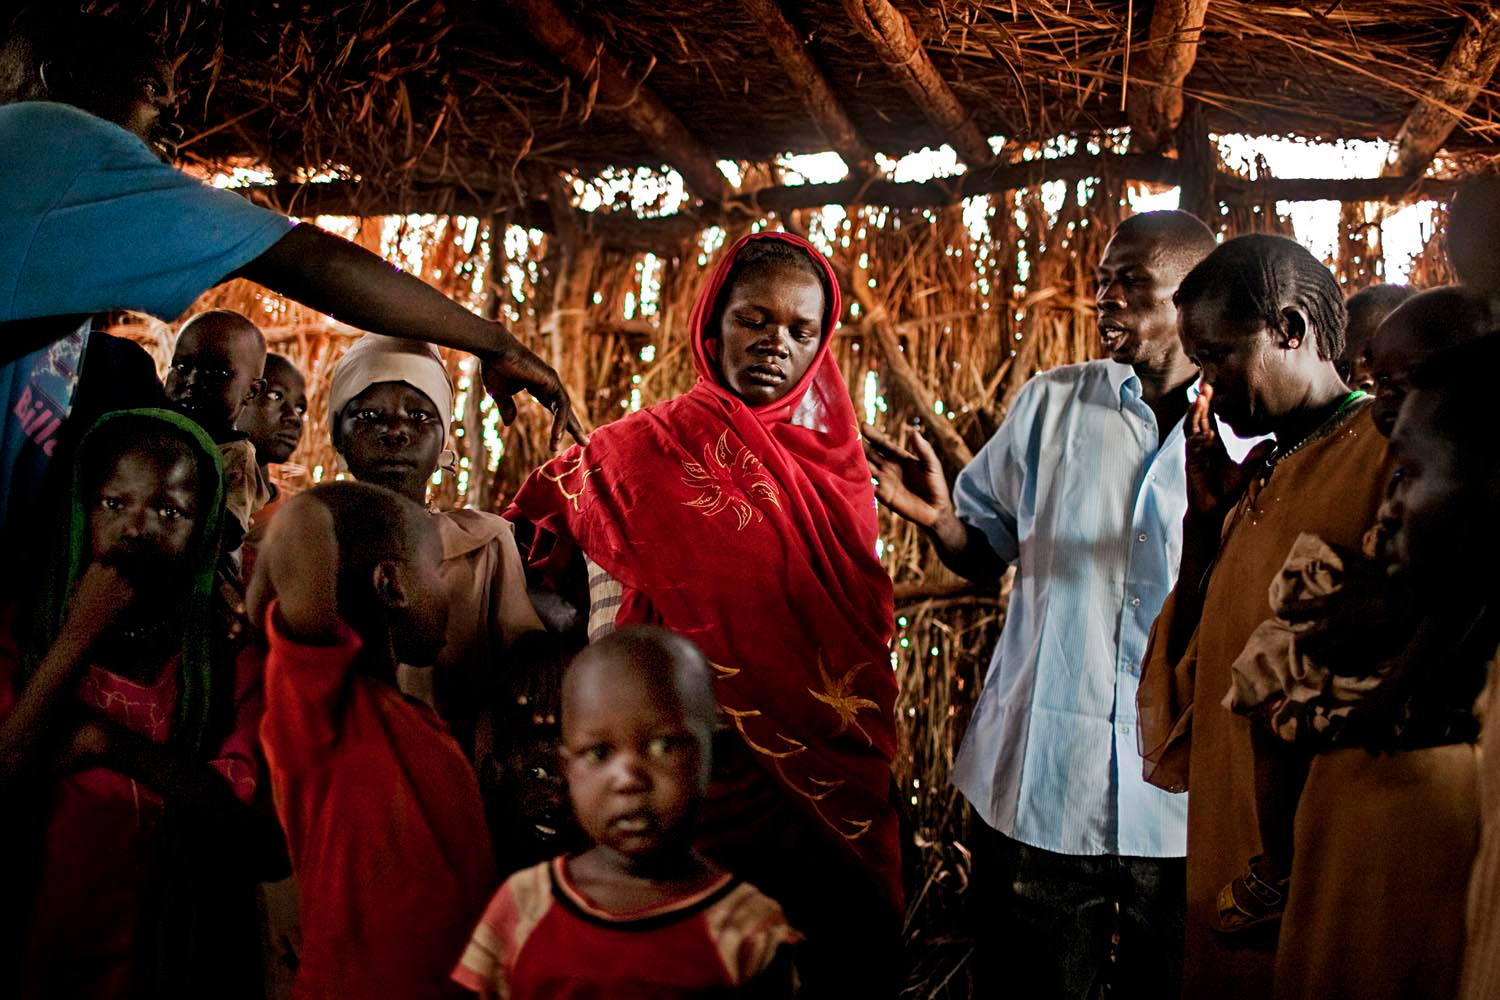 A newly arrived Nuba woman and her family wait to be registered at a refugee registration center outside of the Yida refugee camp.